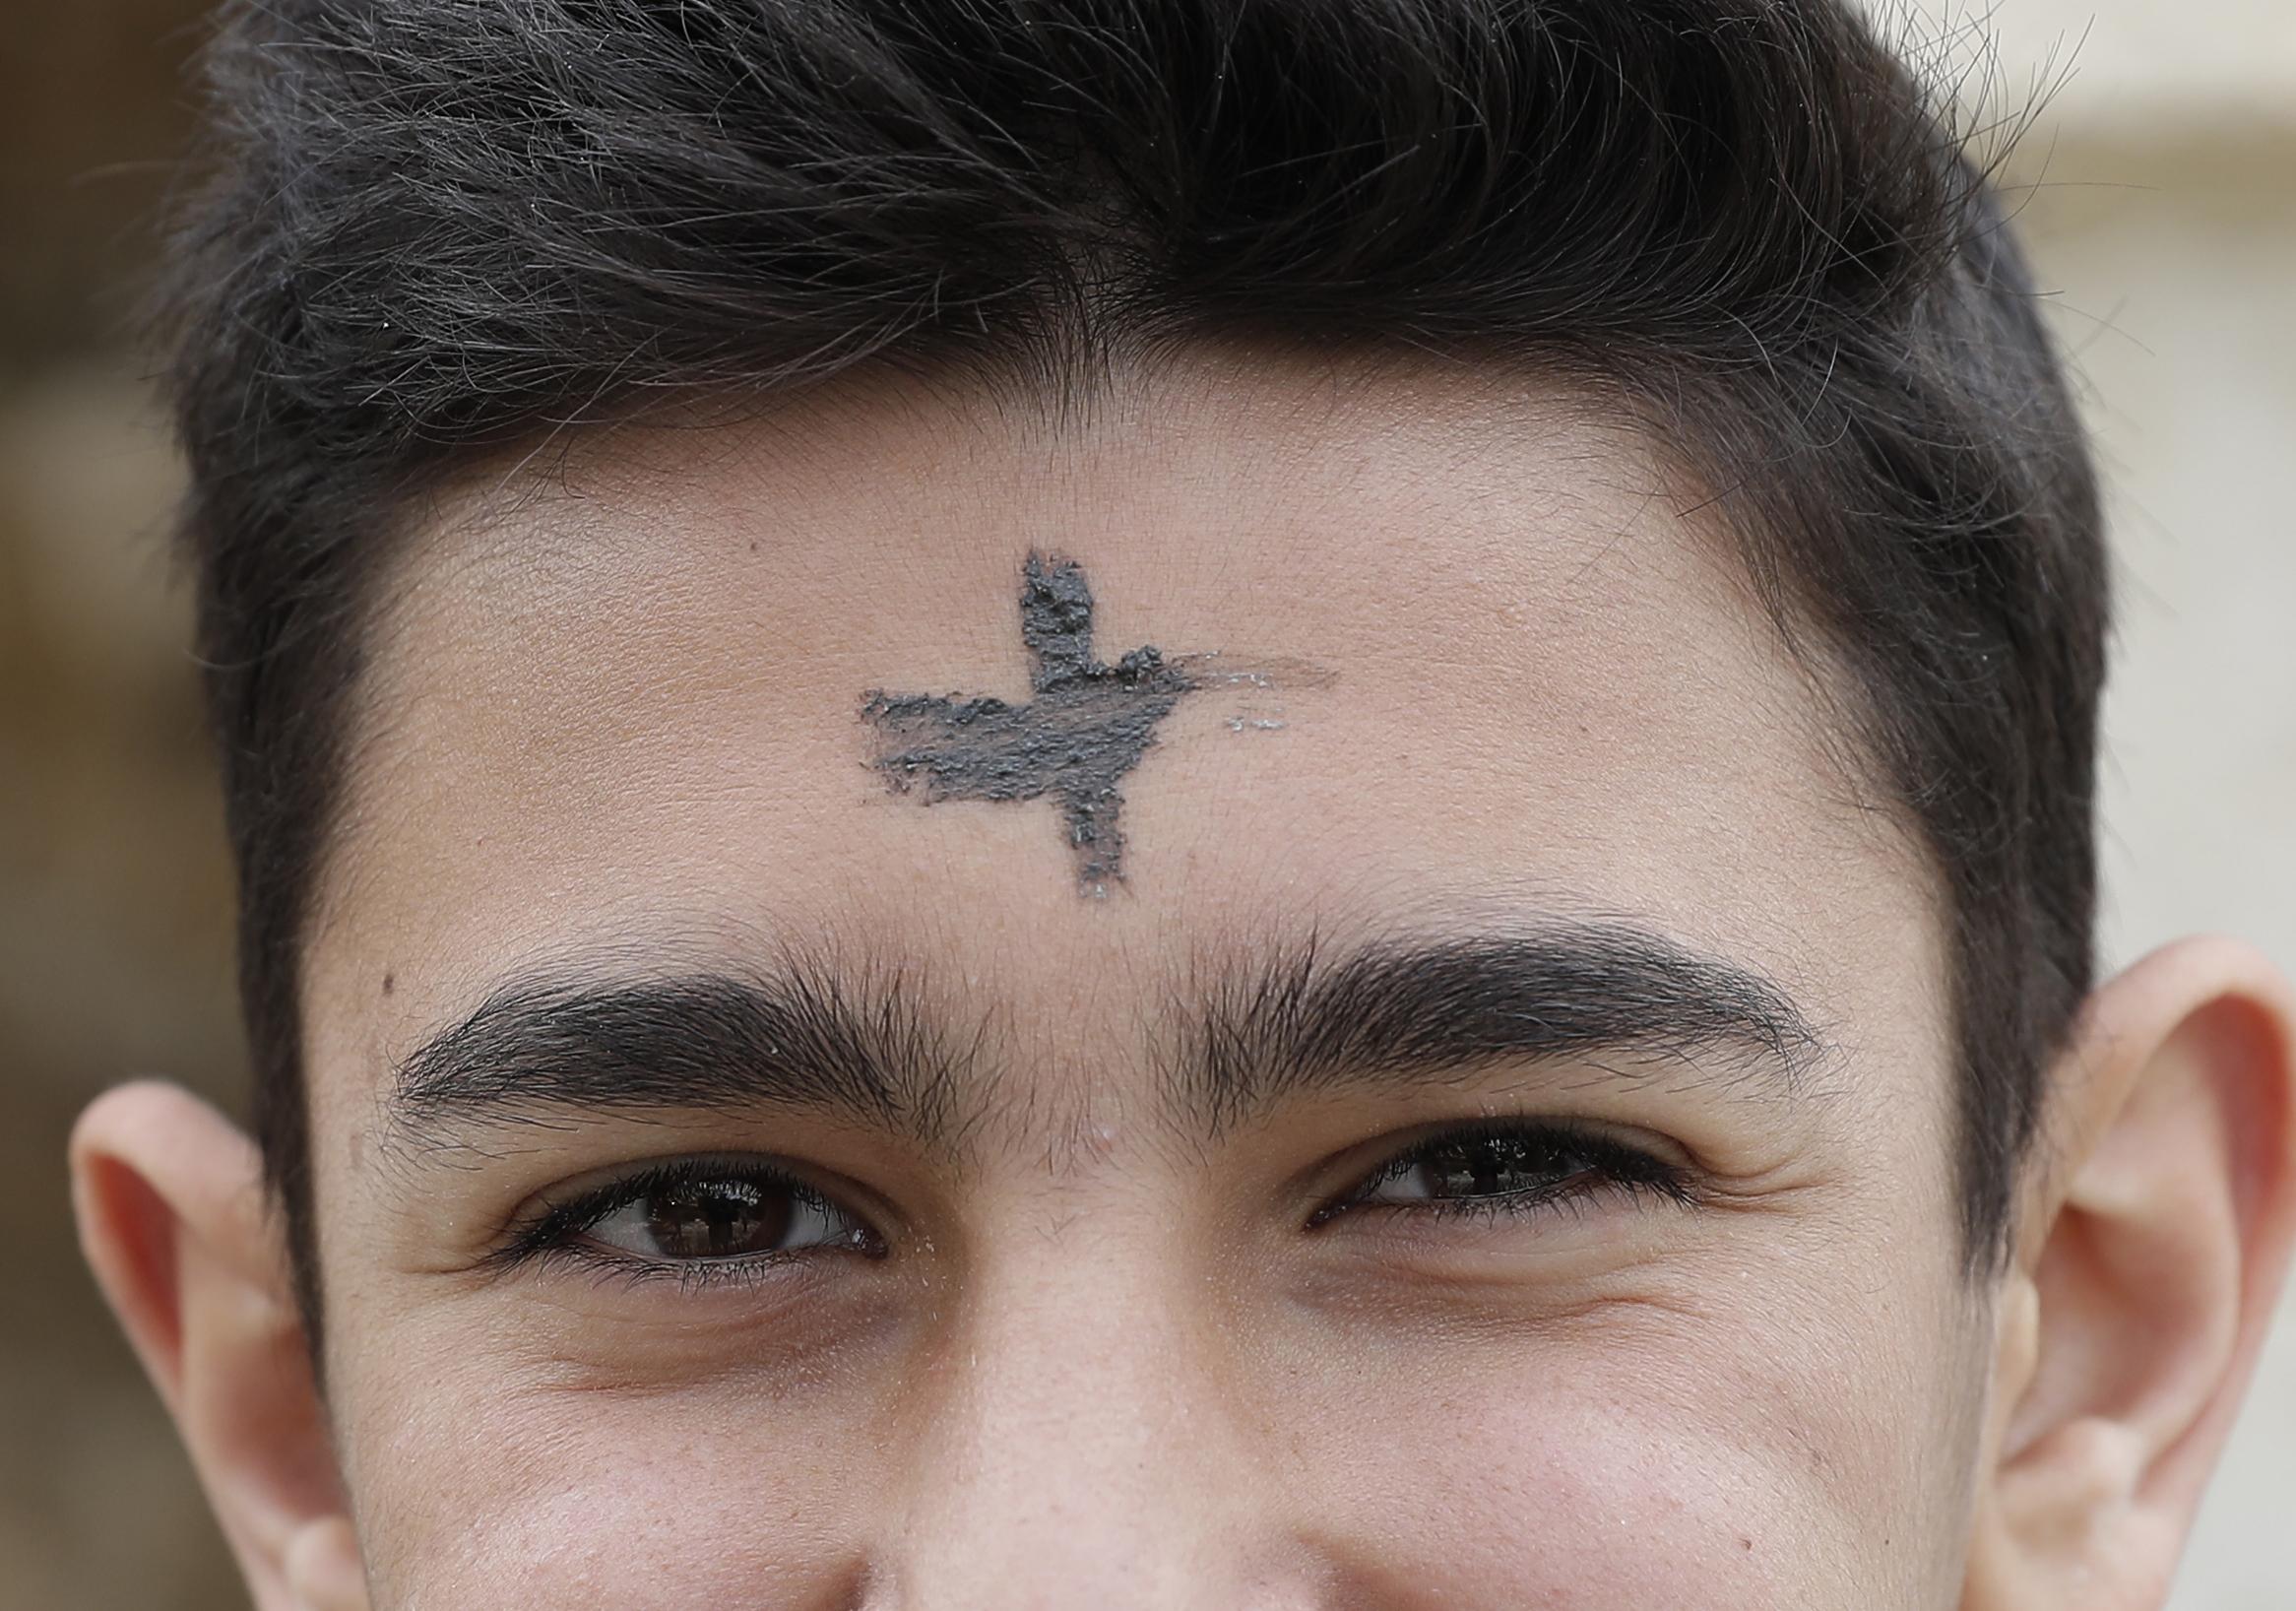 A Lebanese Christian youth, bearing an ash cross on his forehead, looks on after leaving church in the coastal city of Byblos north of Beirut, on February 27, 2017